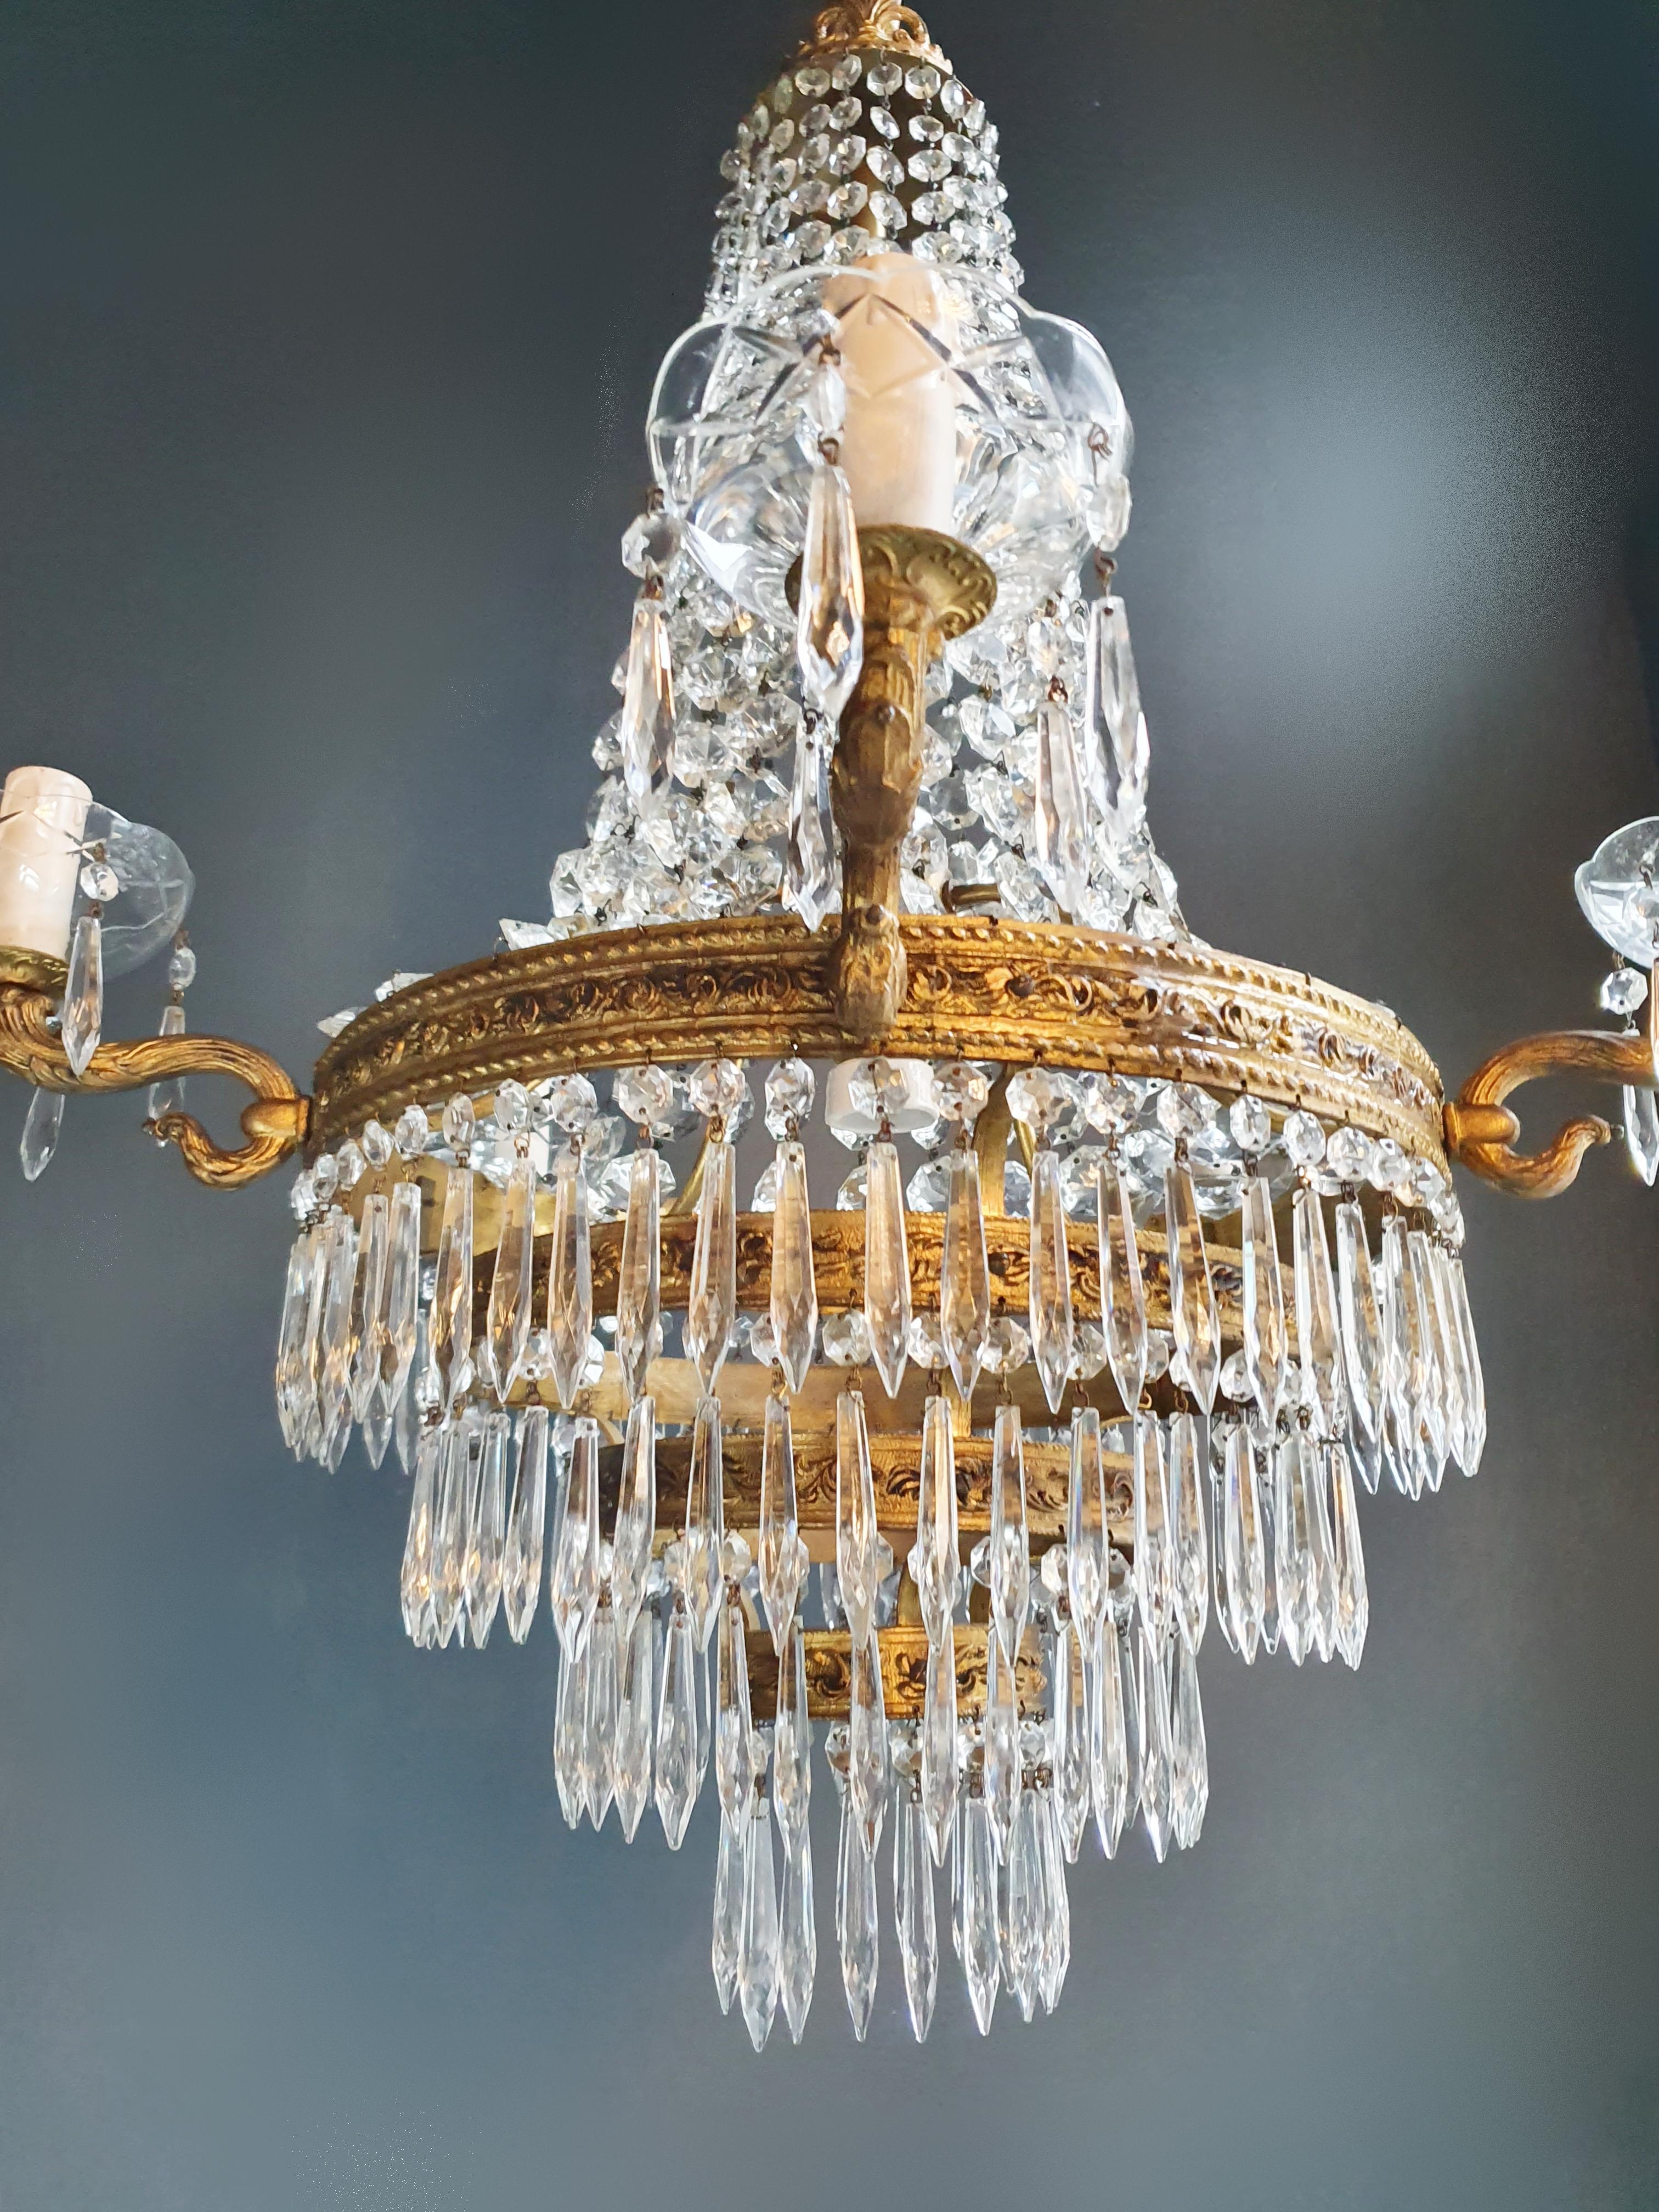 Lovingly Restored Antique Chandelier: Rekindled Beauty from Berlin

This meticulously restored antique chandelier, crafted with care in Berlin, has been reimagined to grace your space with its timeless charm. With meticulous attention to detail, it